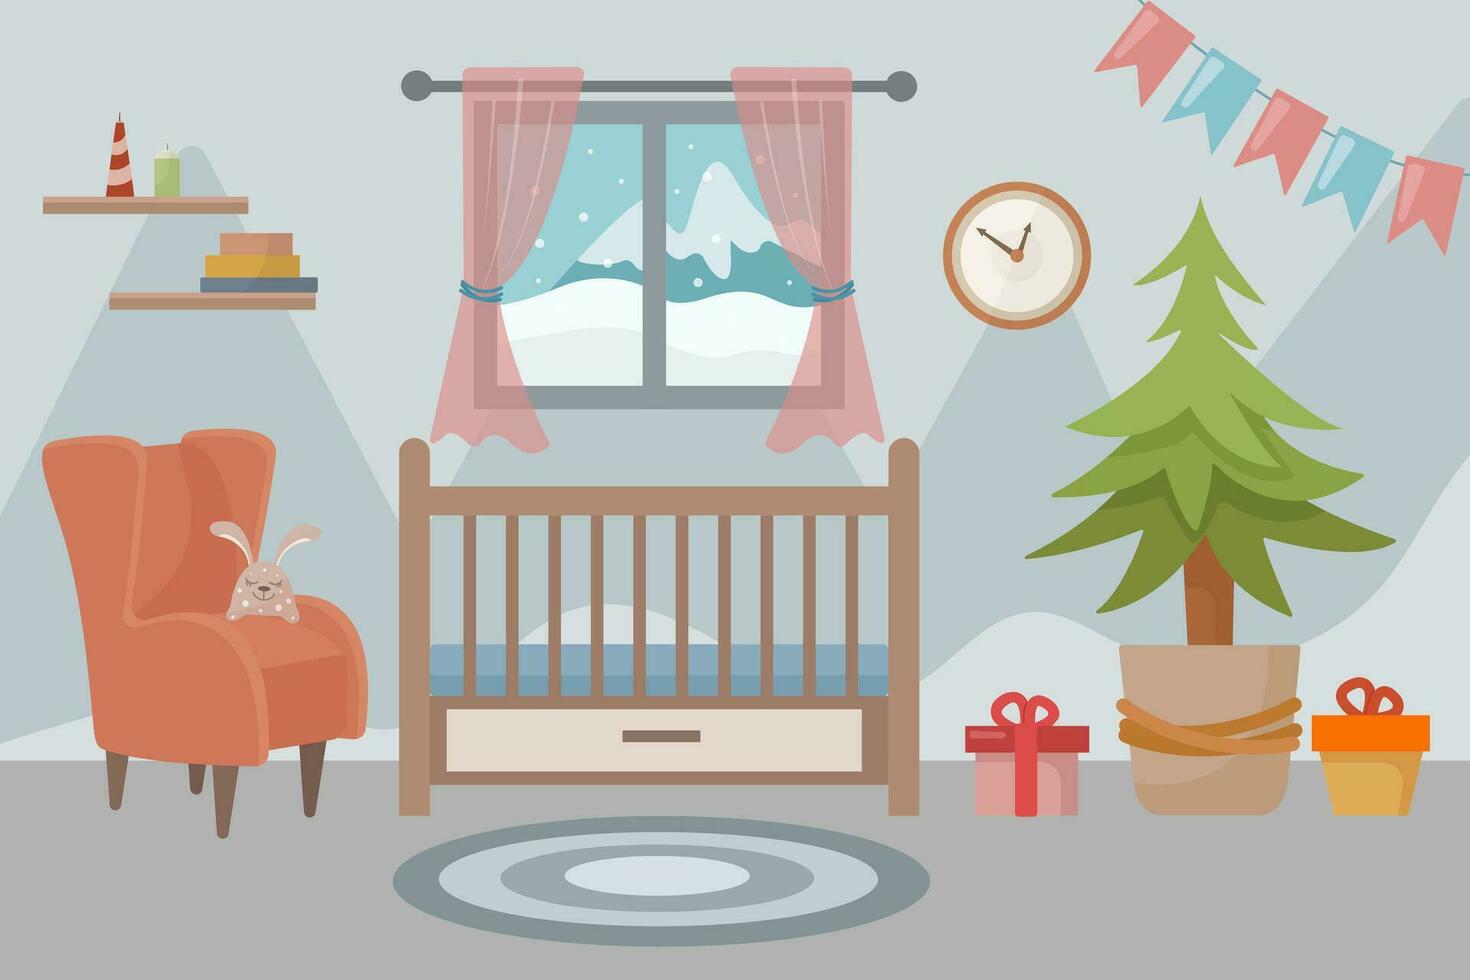 Children's room decorated for Christmas and New Year. Children's bedroom with a crib, Christmas tree, books, armchair, gifts. Window with a beautiful winter view. Interior concept. Vector illustration